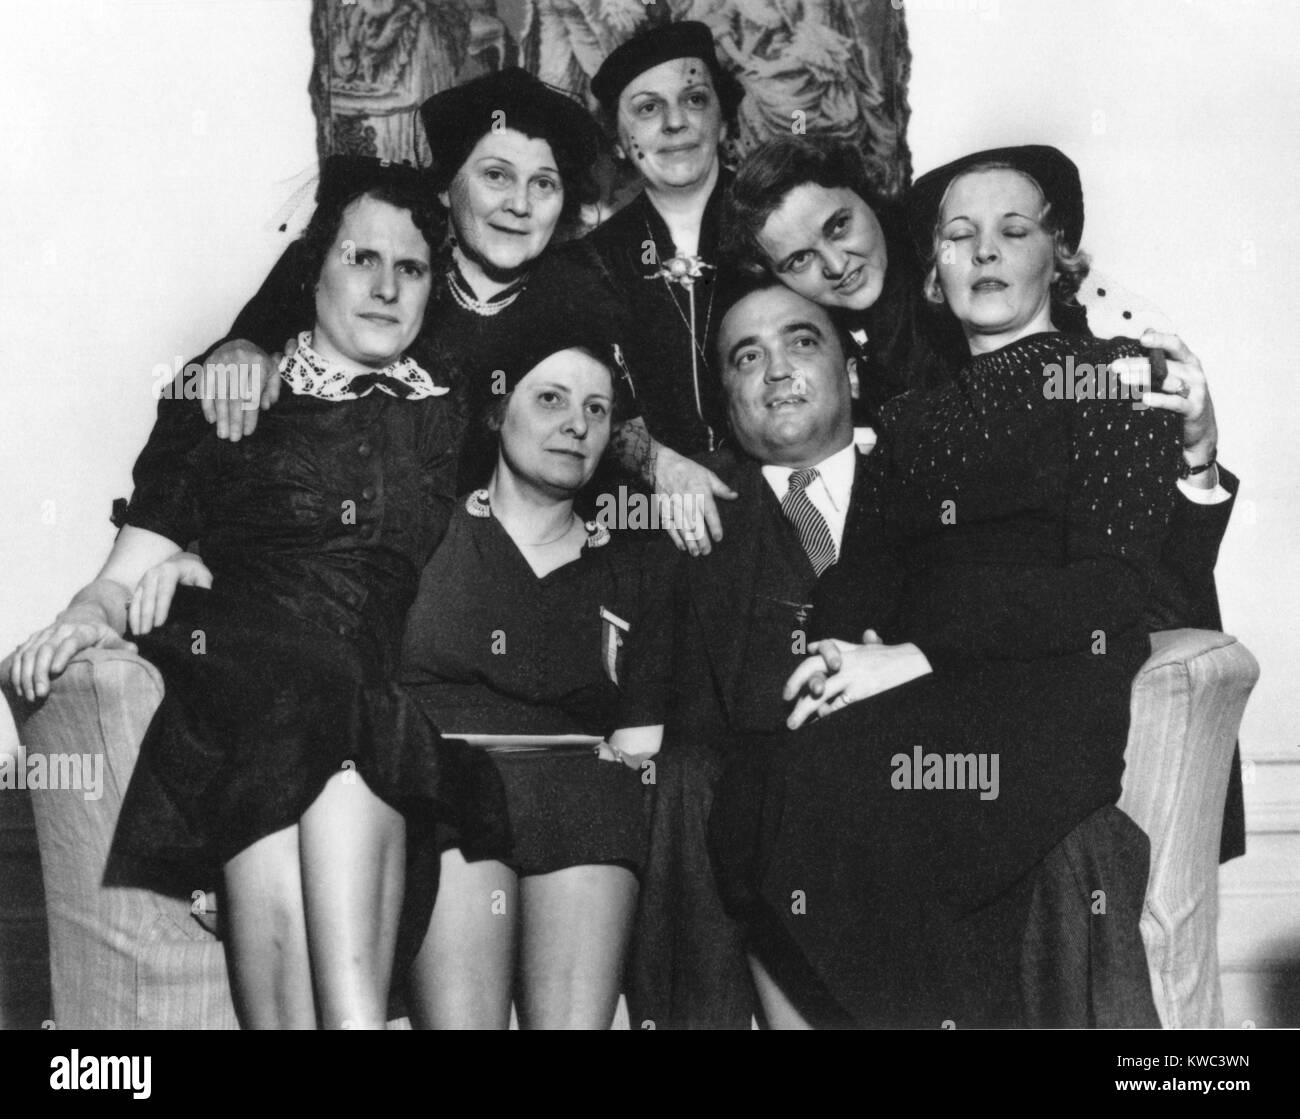 FBI Director J. Edgar Hoover on a loveseat with six women at the Willard Hotel, Washington, D.C. They were attending the convention of the International Association for Identification, for professionals in forensic identification, investigation, and scientific examination of physical evidence. Ca. 1940. (BSLOC_2015_14_20) Stock Photo